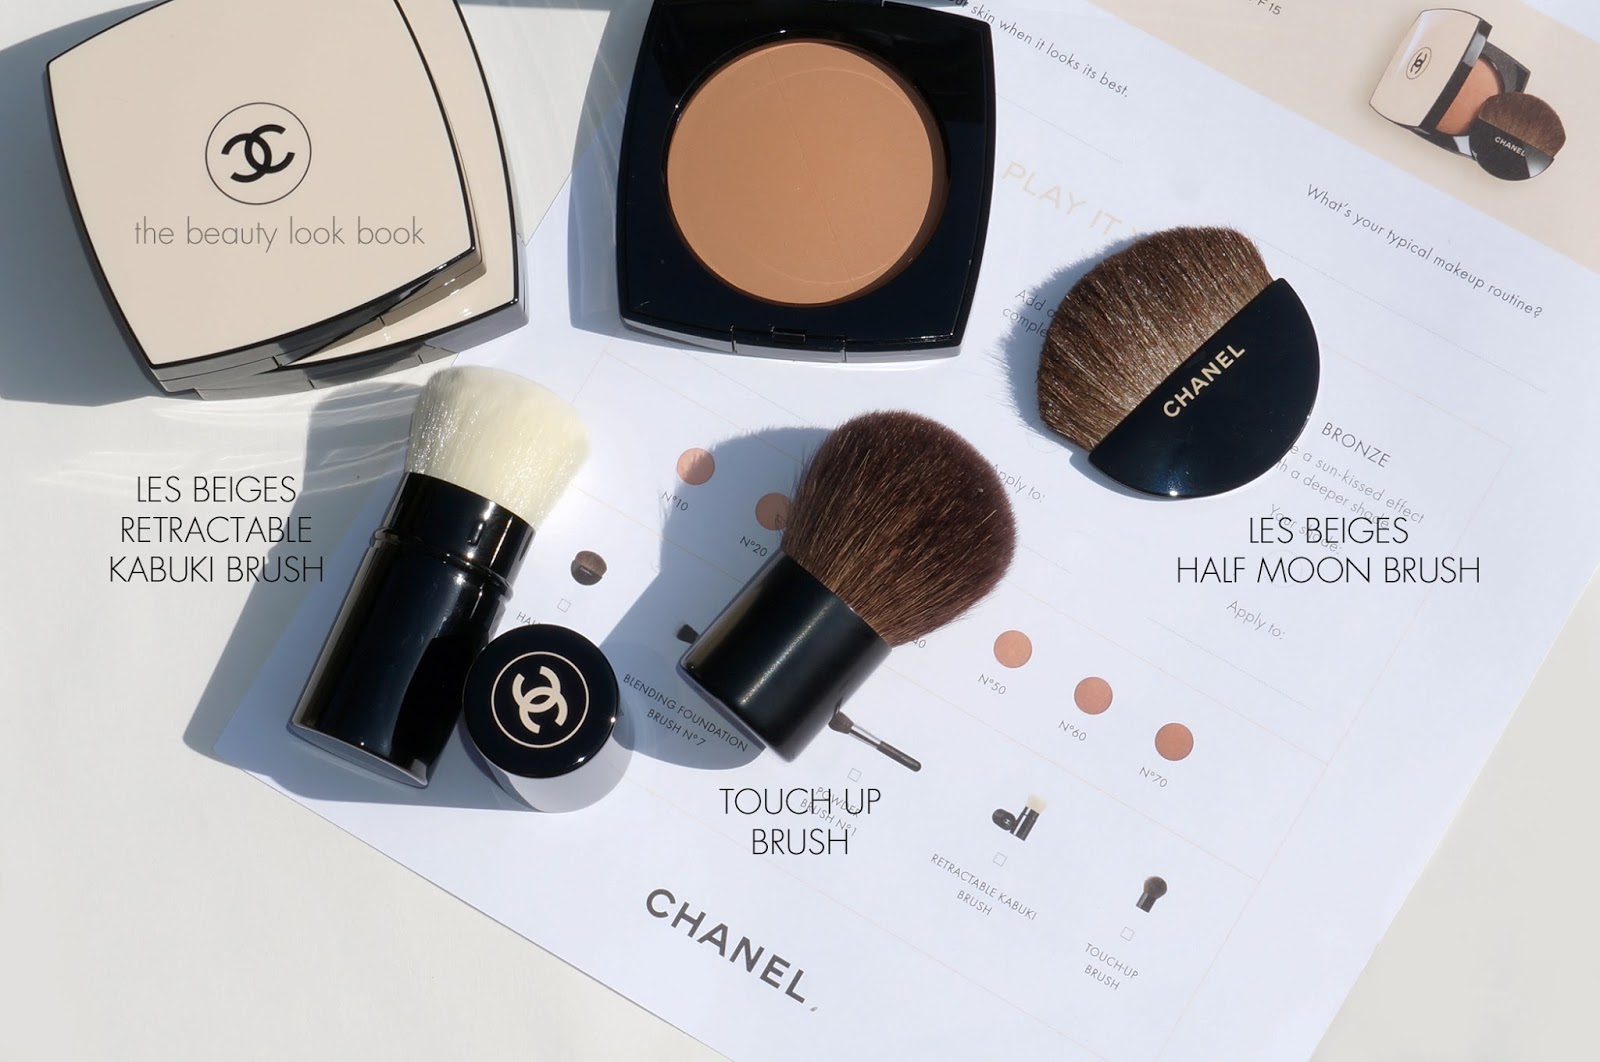 Chanel Les Beiges Healthy Glow Sheer Colour SPF 15 Powders N° 20, 30 and 40  - The Beauty Look Book